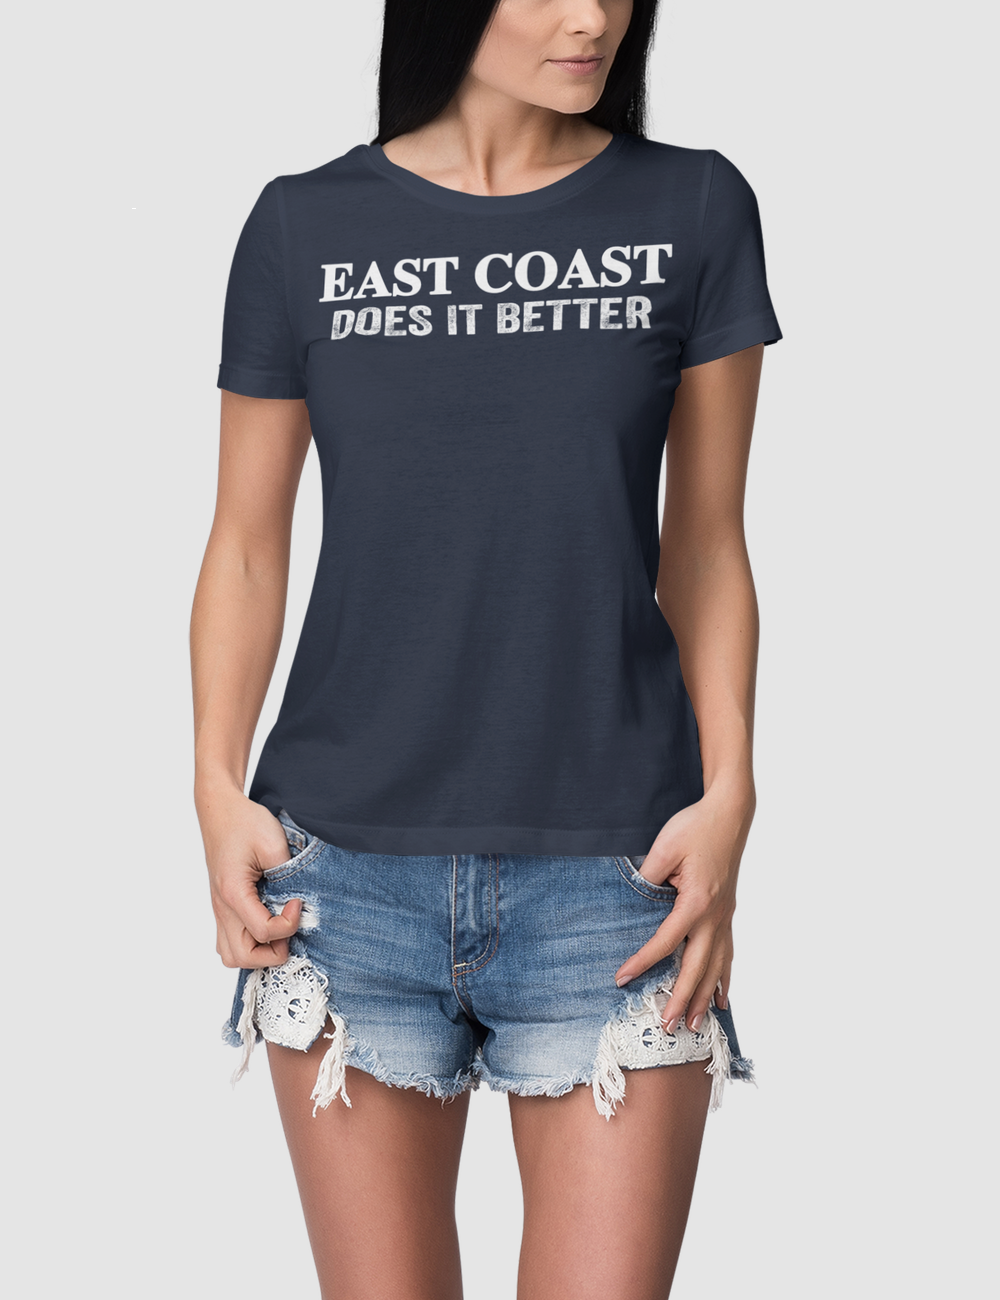 East Coast Does It Better | Women's Fitted T-Shirt OniTakai